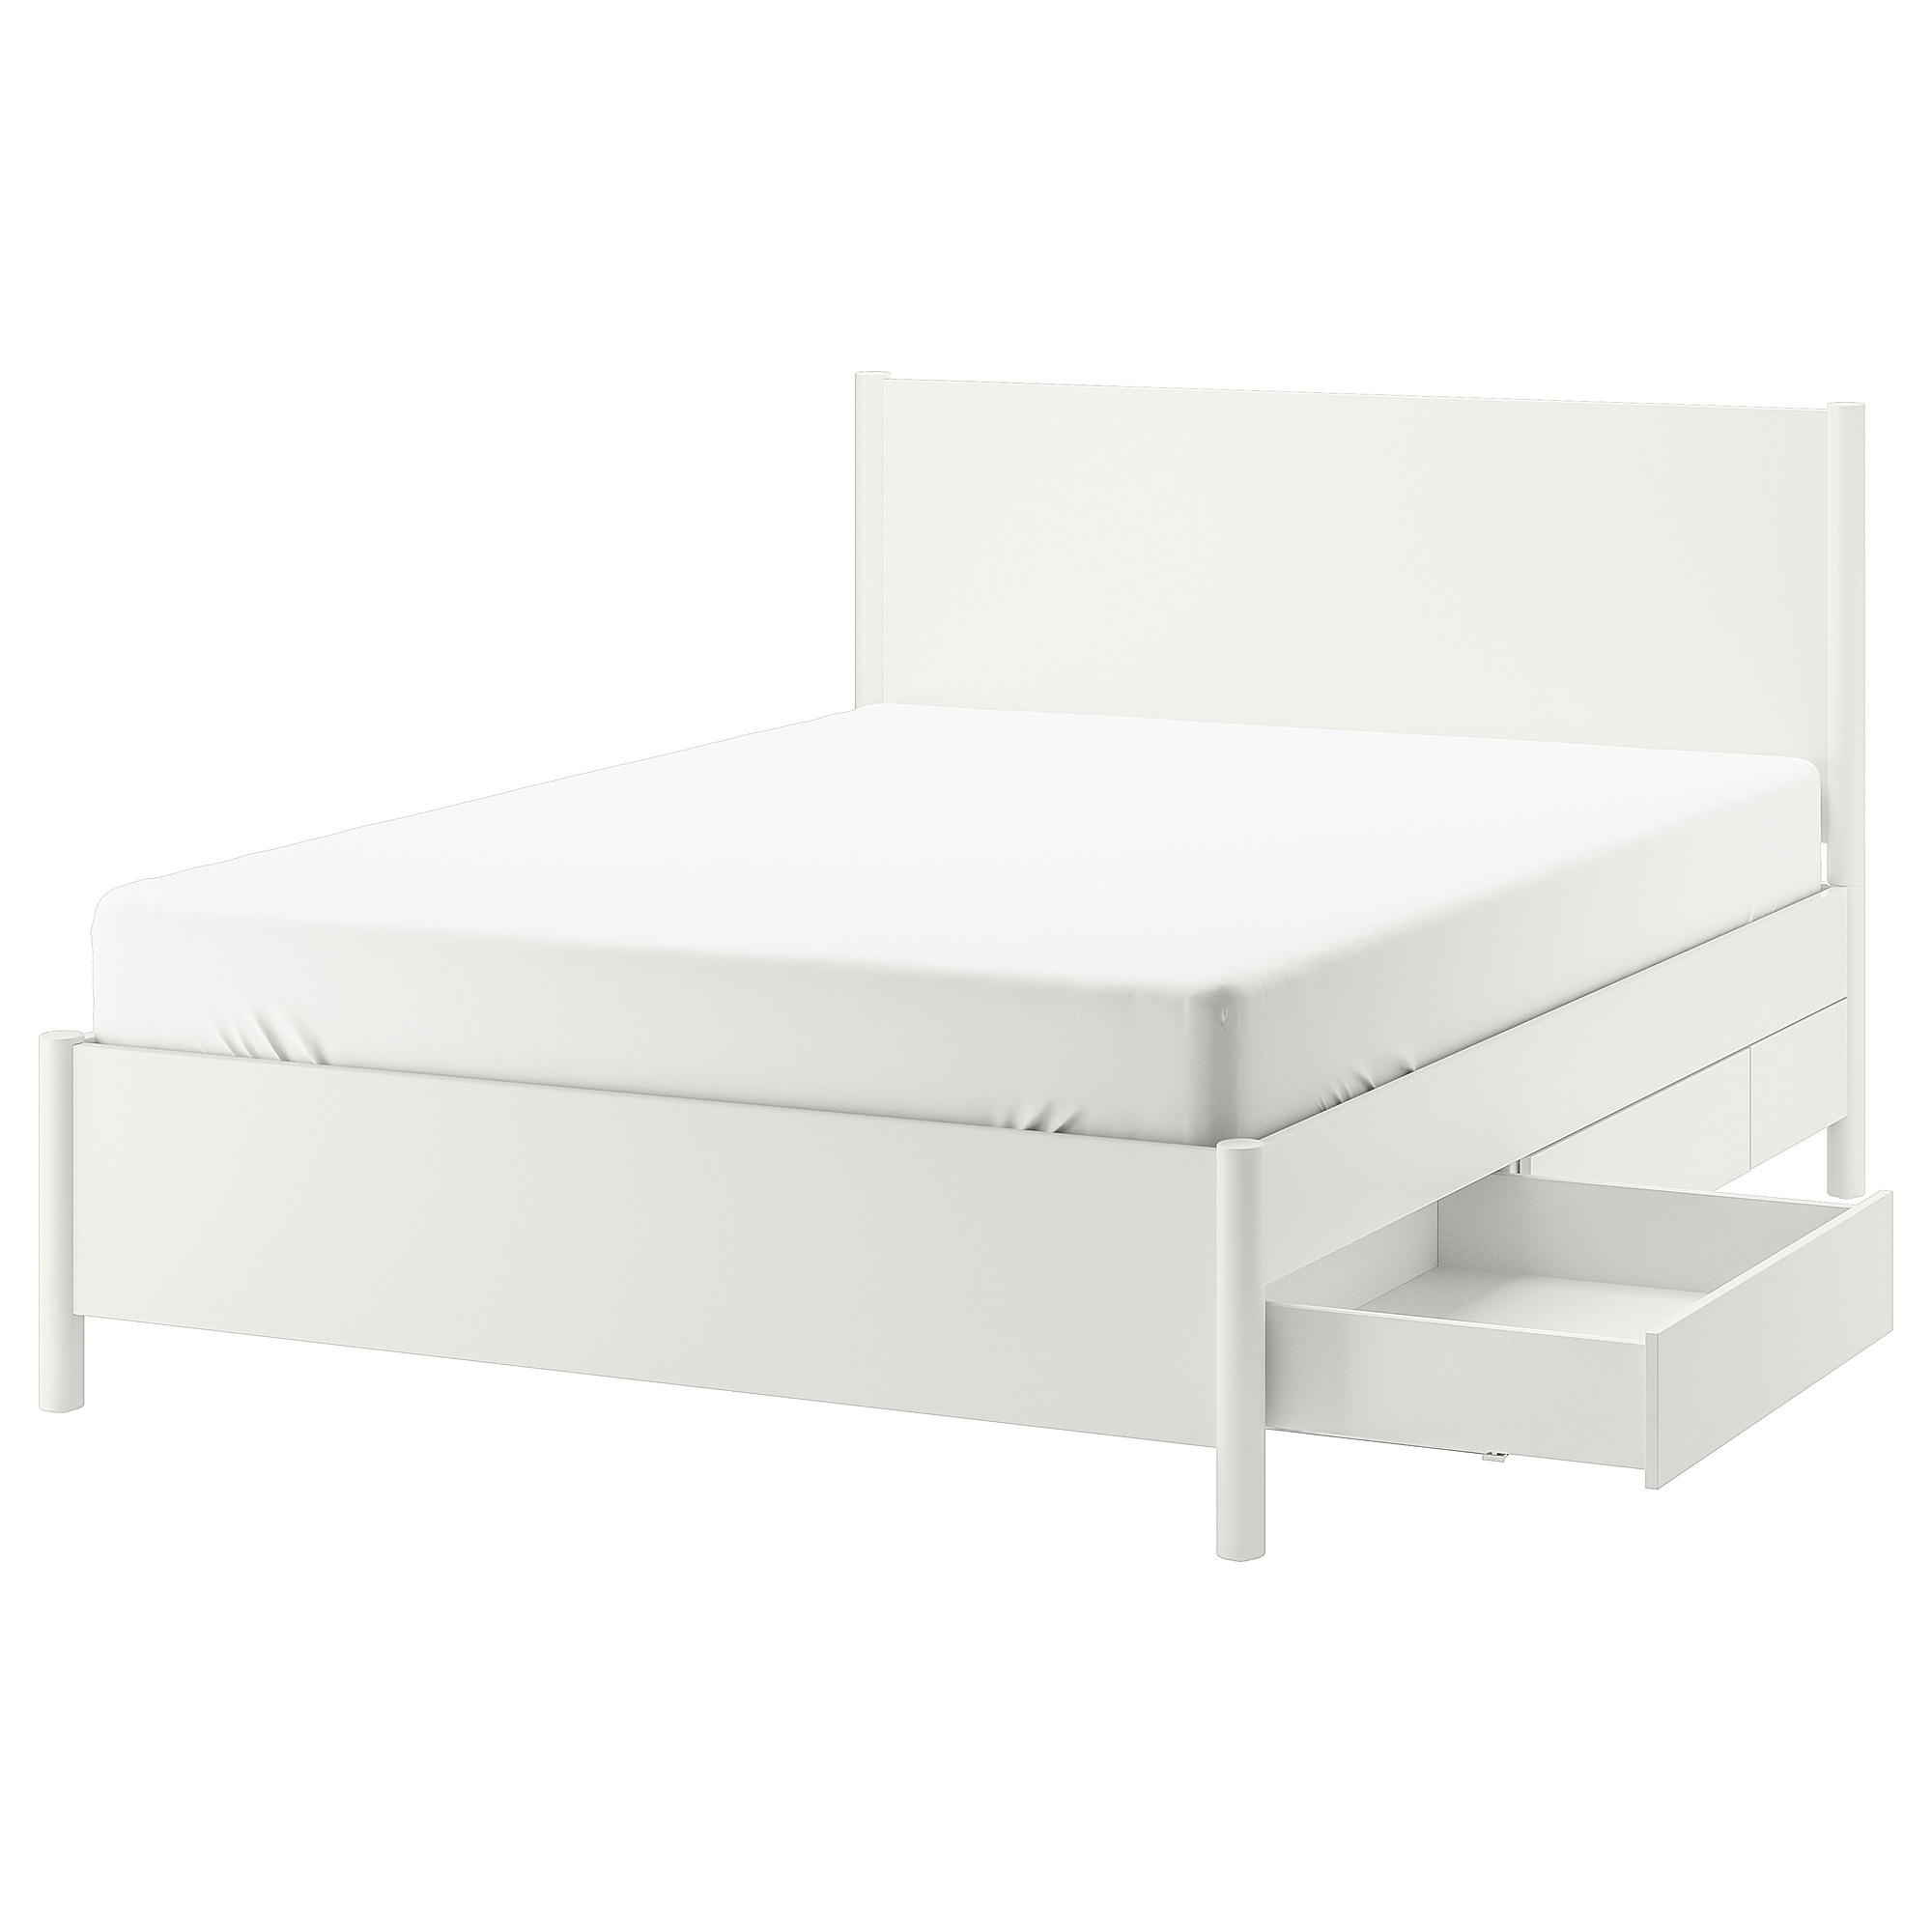 TONSTAD bed frame with storage